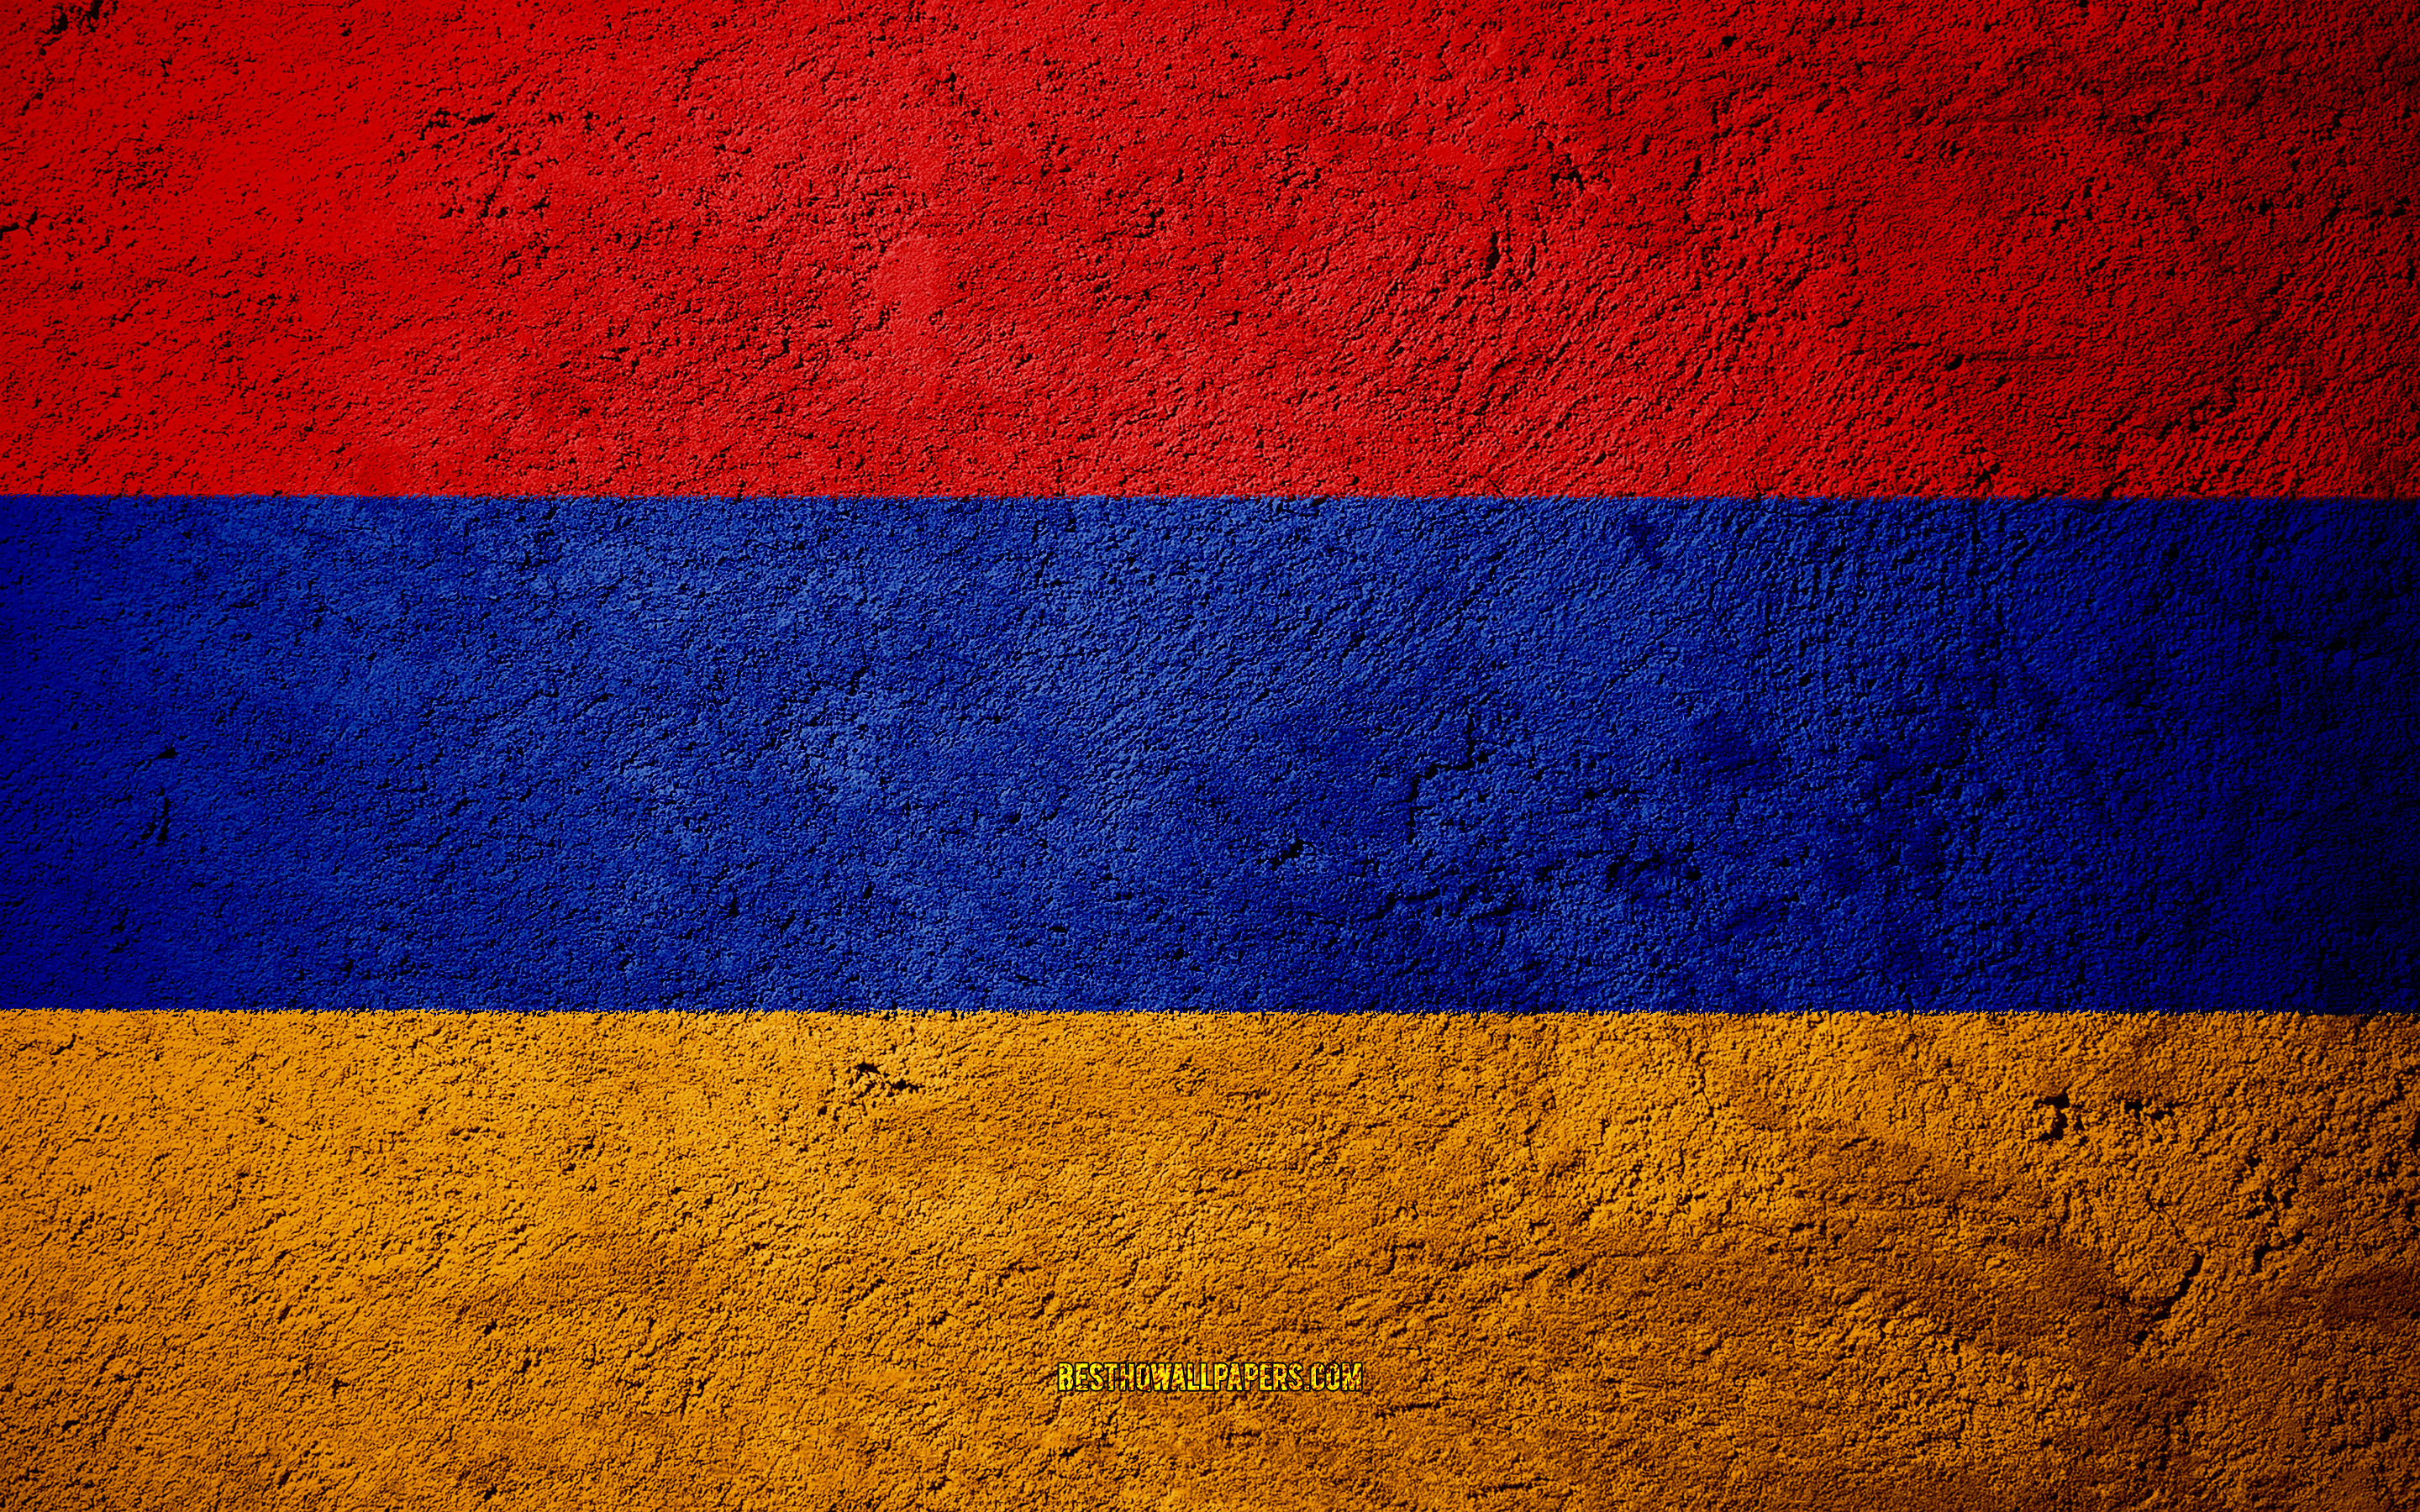 Download wallpaper Flag of Armenia, concrete texture, stone background, Armenia flag, Europe, Armenia, flags on stone for desktop with resolution 2880x1800. High Quality HD picture wallpaper